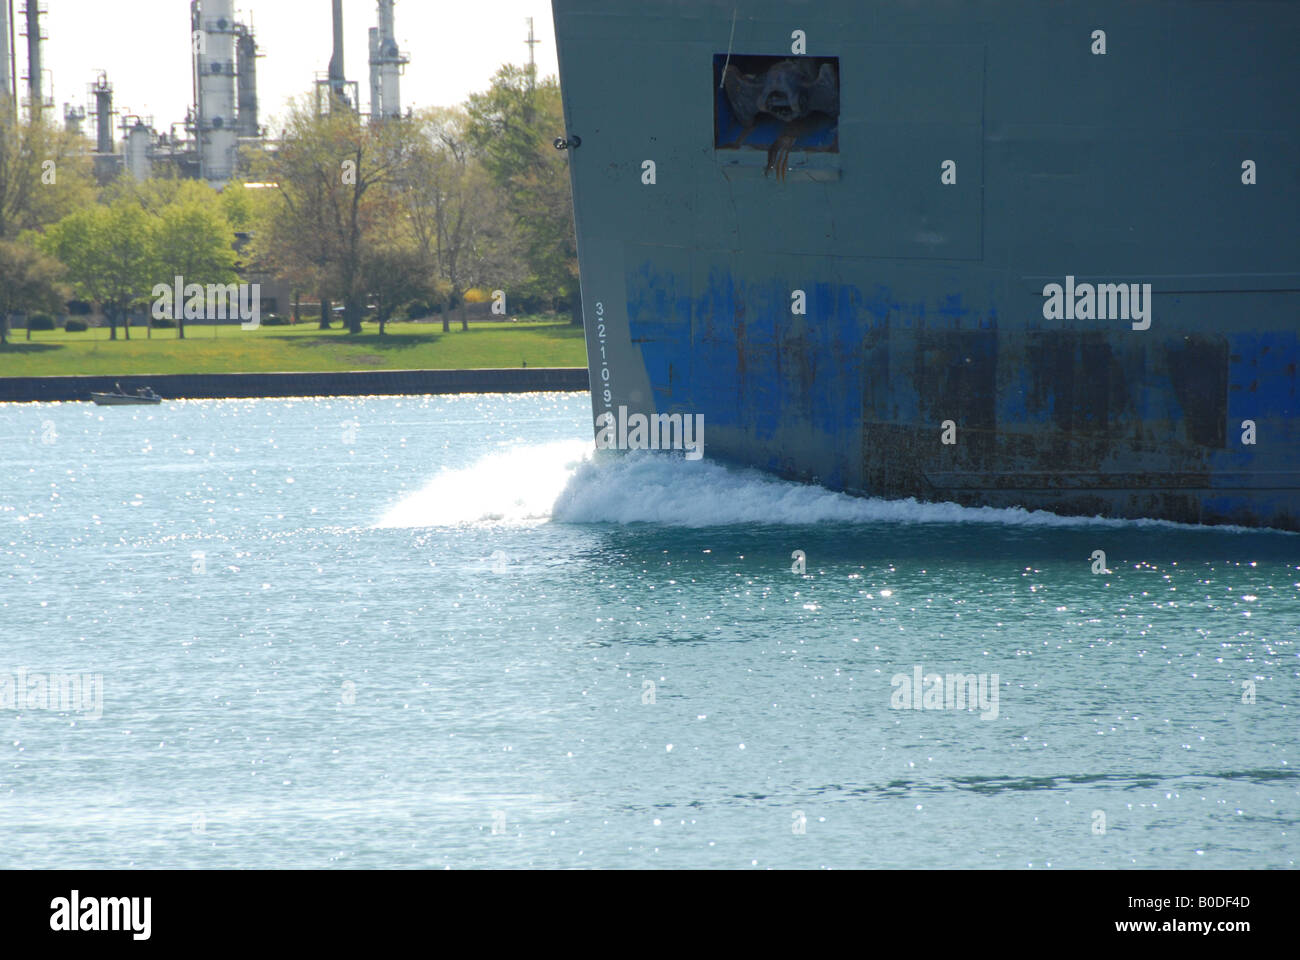 The bow of a freighter cuts through the water making waves. Stock Photo